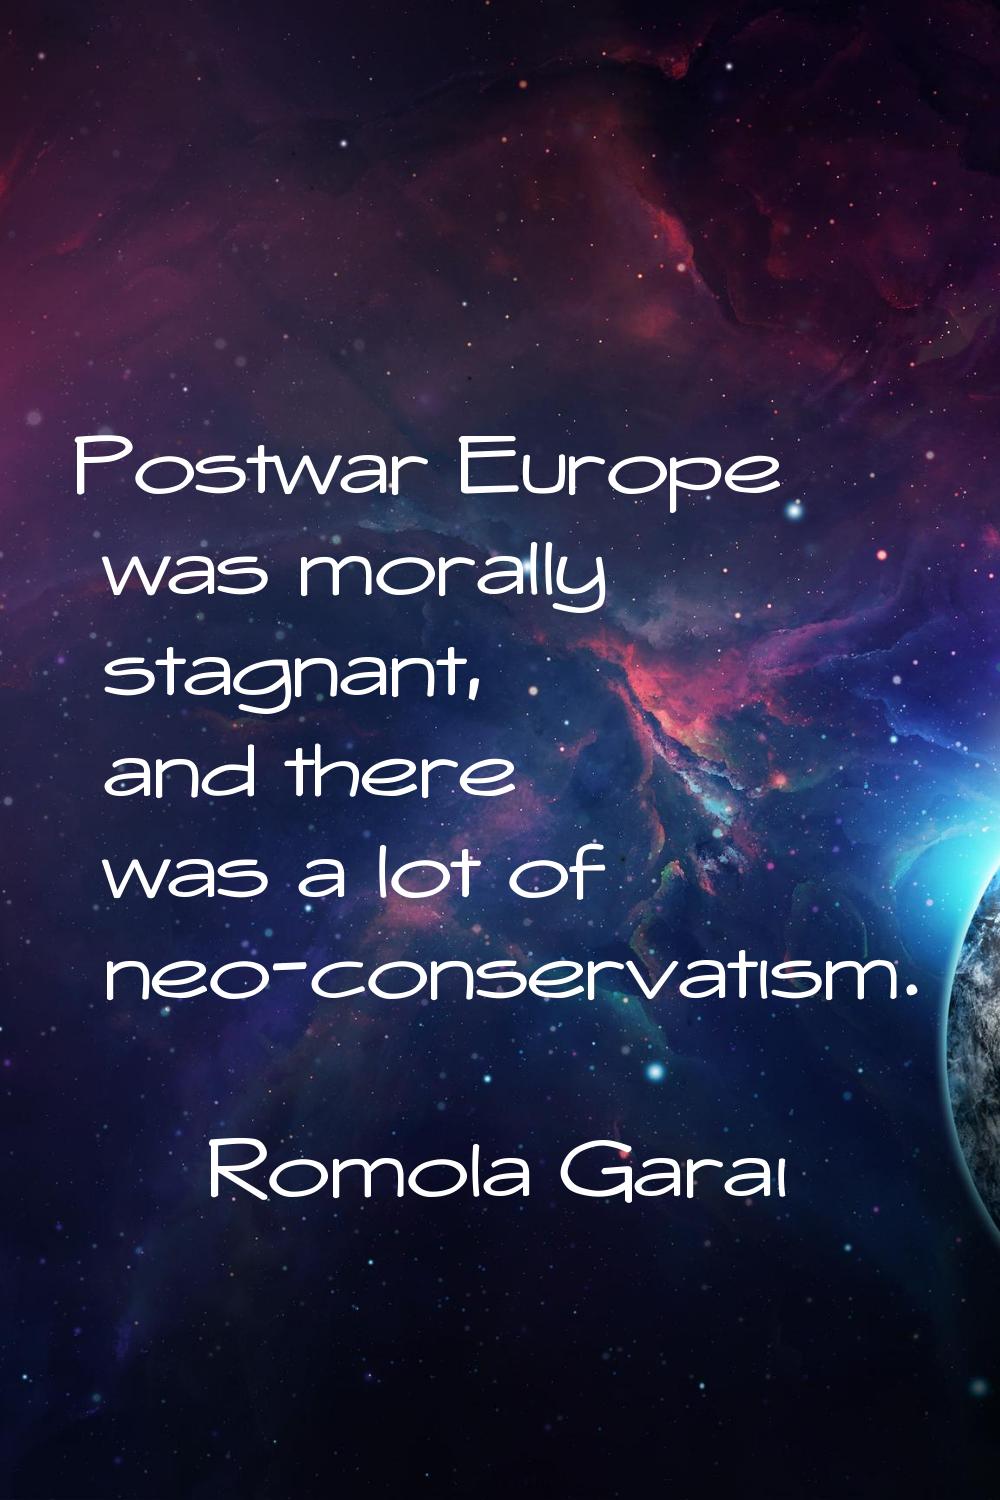 Postwar Europe was morally stagnant, and there was a lot of neo-conservatism.